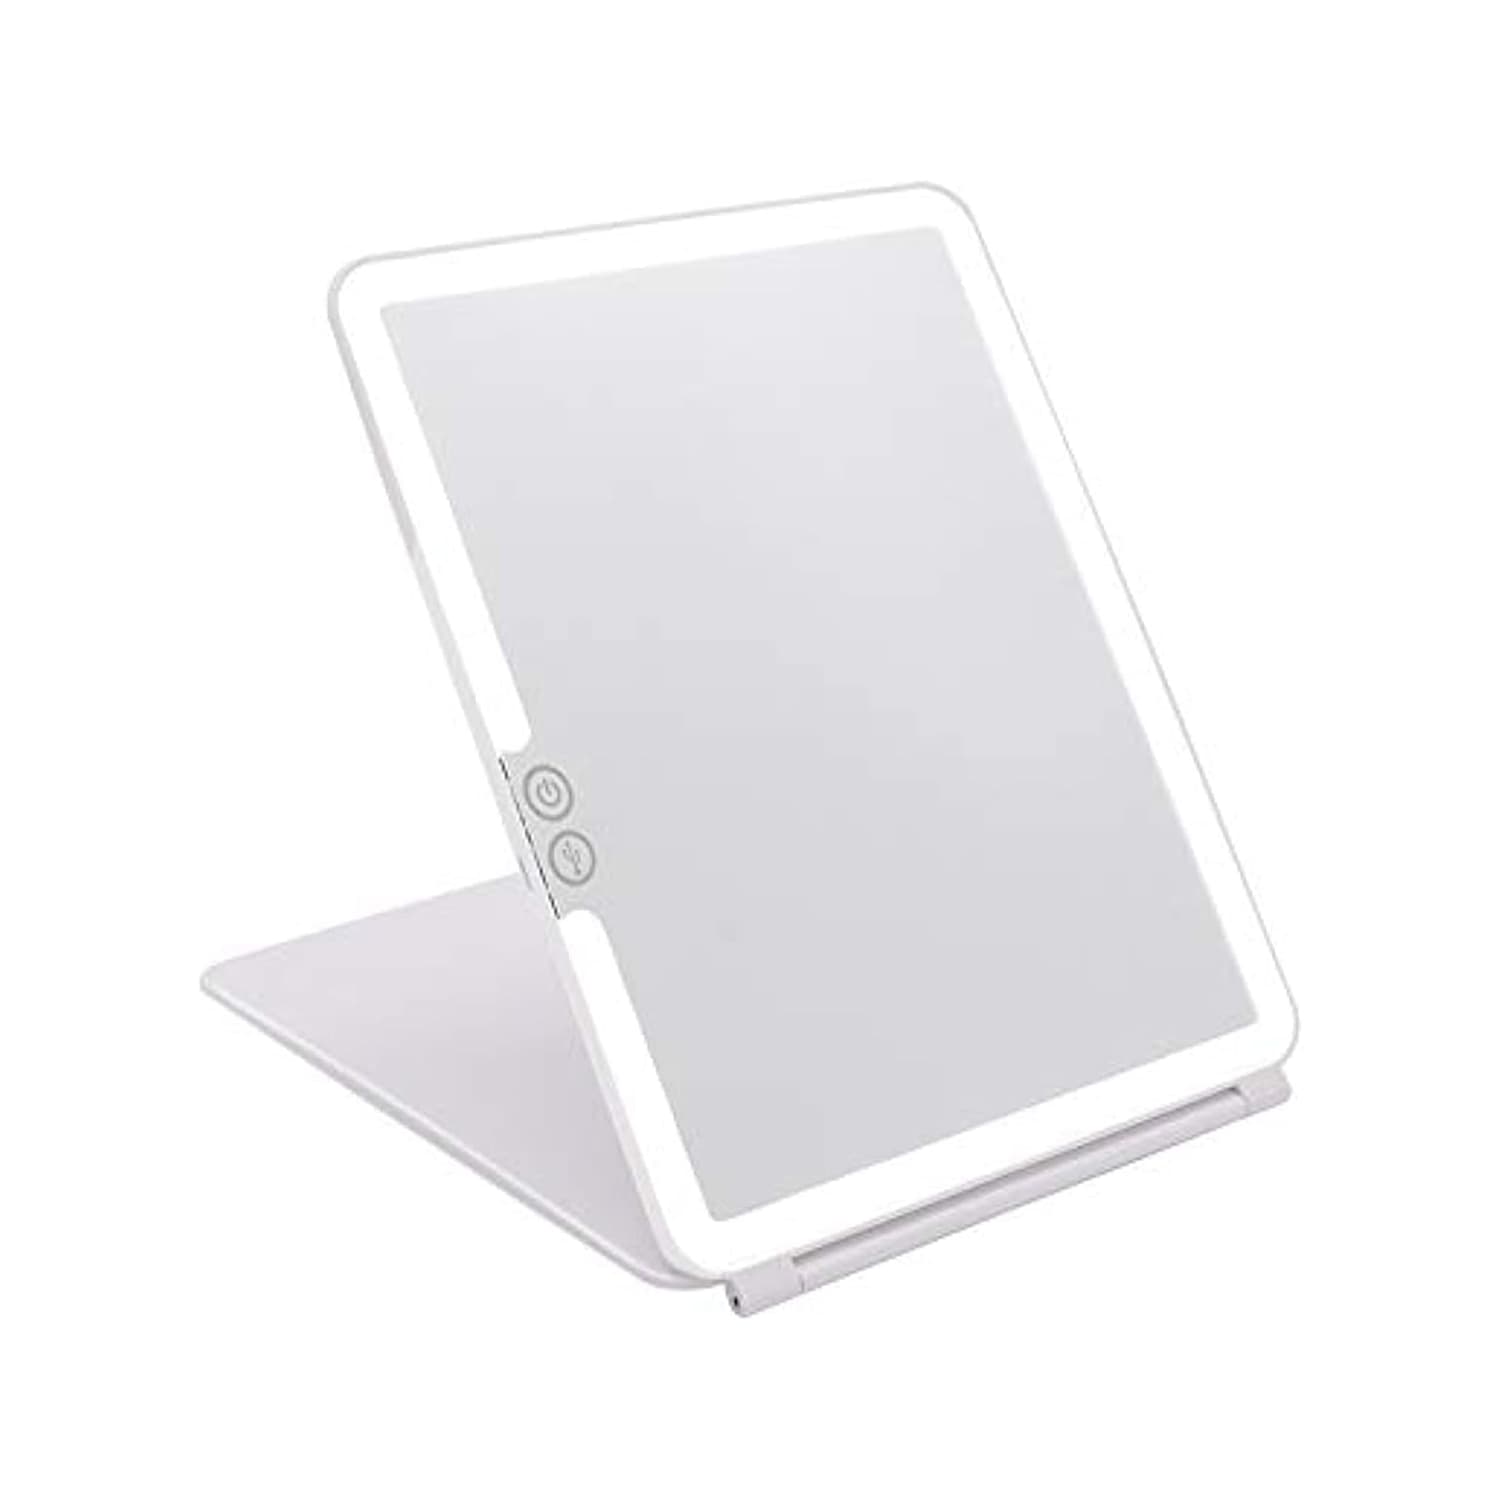 http://cdn.apartmenttherapy.info/image/upload/v1693503351/dt/photo/style-and-shopping/2023-09/perfect-shower-caddy/deweisn-folding-lighted-makeup-mirror.jpg